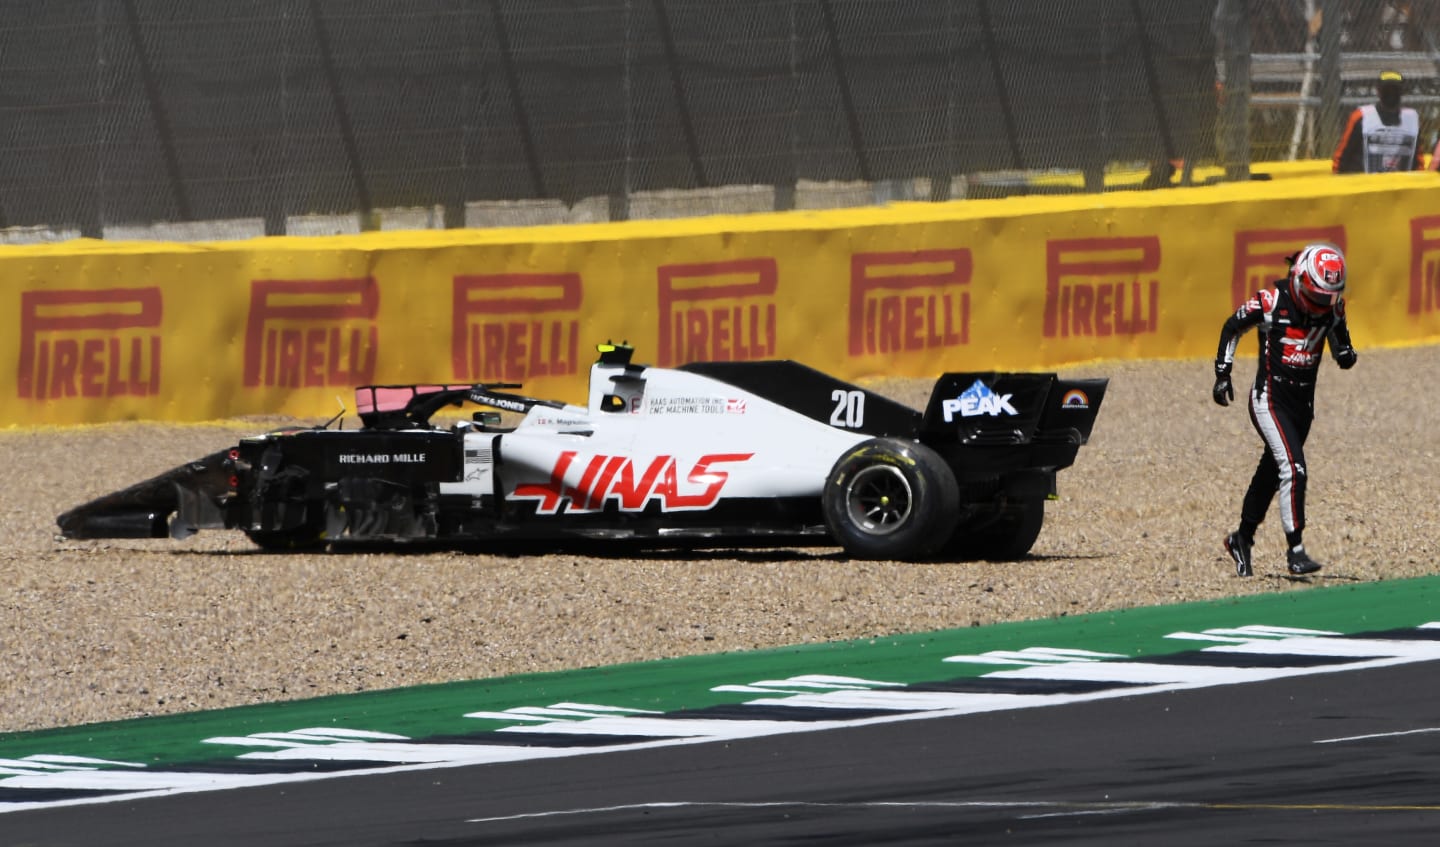 NORTHAMPTON, ENGLAND - AUGUST 02:  Kevin Magnussen of Denmark driving the (20) Haas F1 Team VF-20 Ferrari leaves his car after spinning off during the F1 Grand Prix of Great Britain at Silverstone on August 02, 2020 in Northampton, England. (Photo by Rudy Carezzevoli/Getty Images)